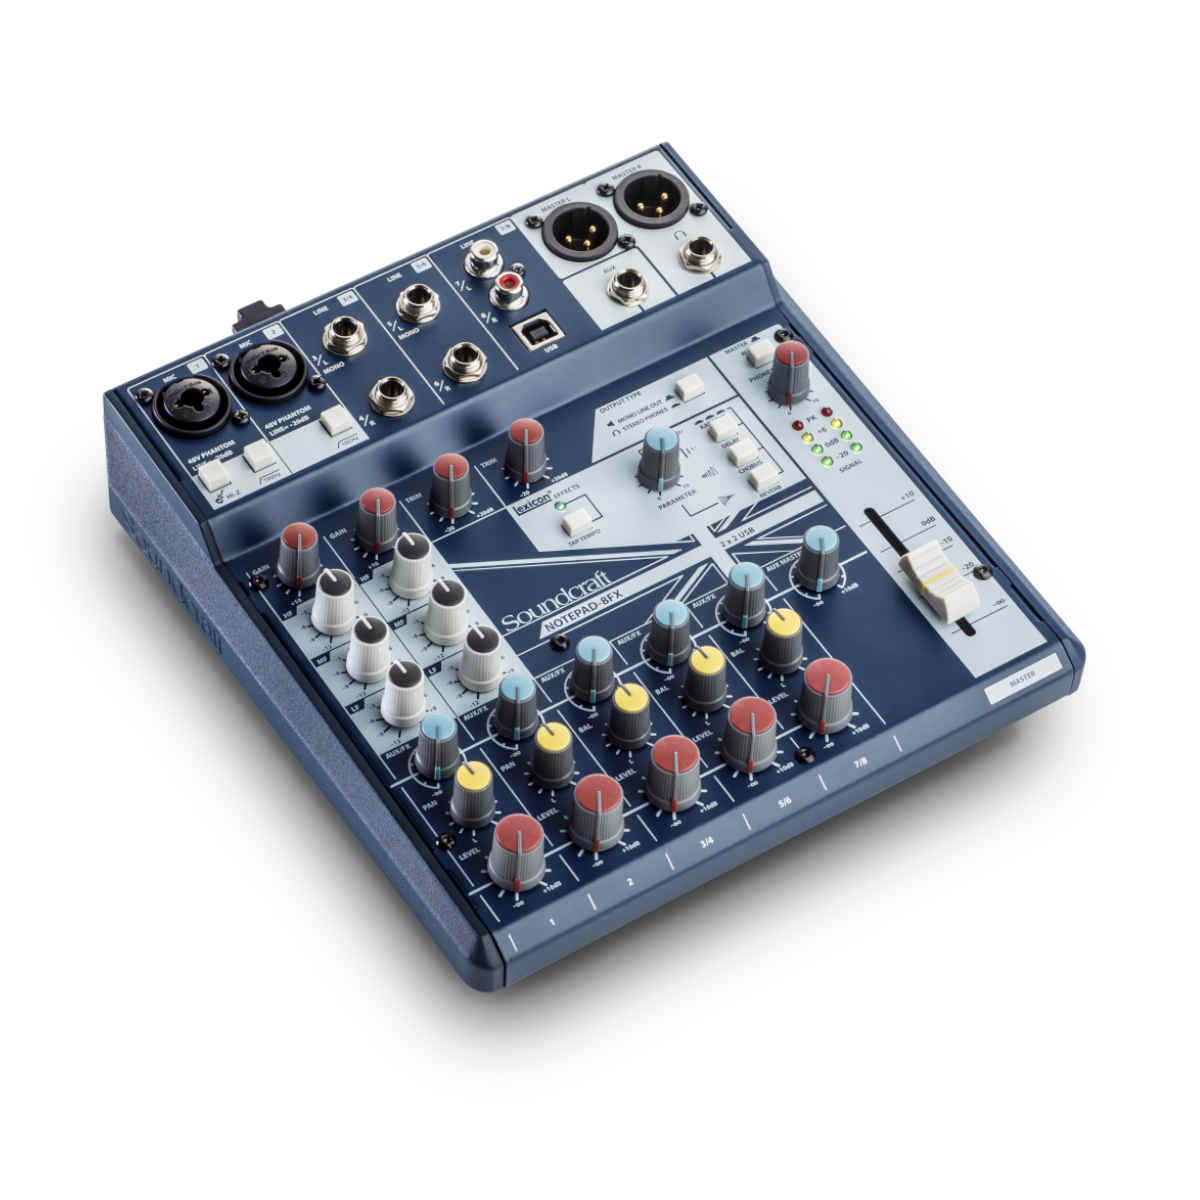 Soundcraft Notepad-8FX Small-format Analog Mixing Console with USB I/O and Lexicon Effects - Ooberpad India